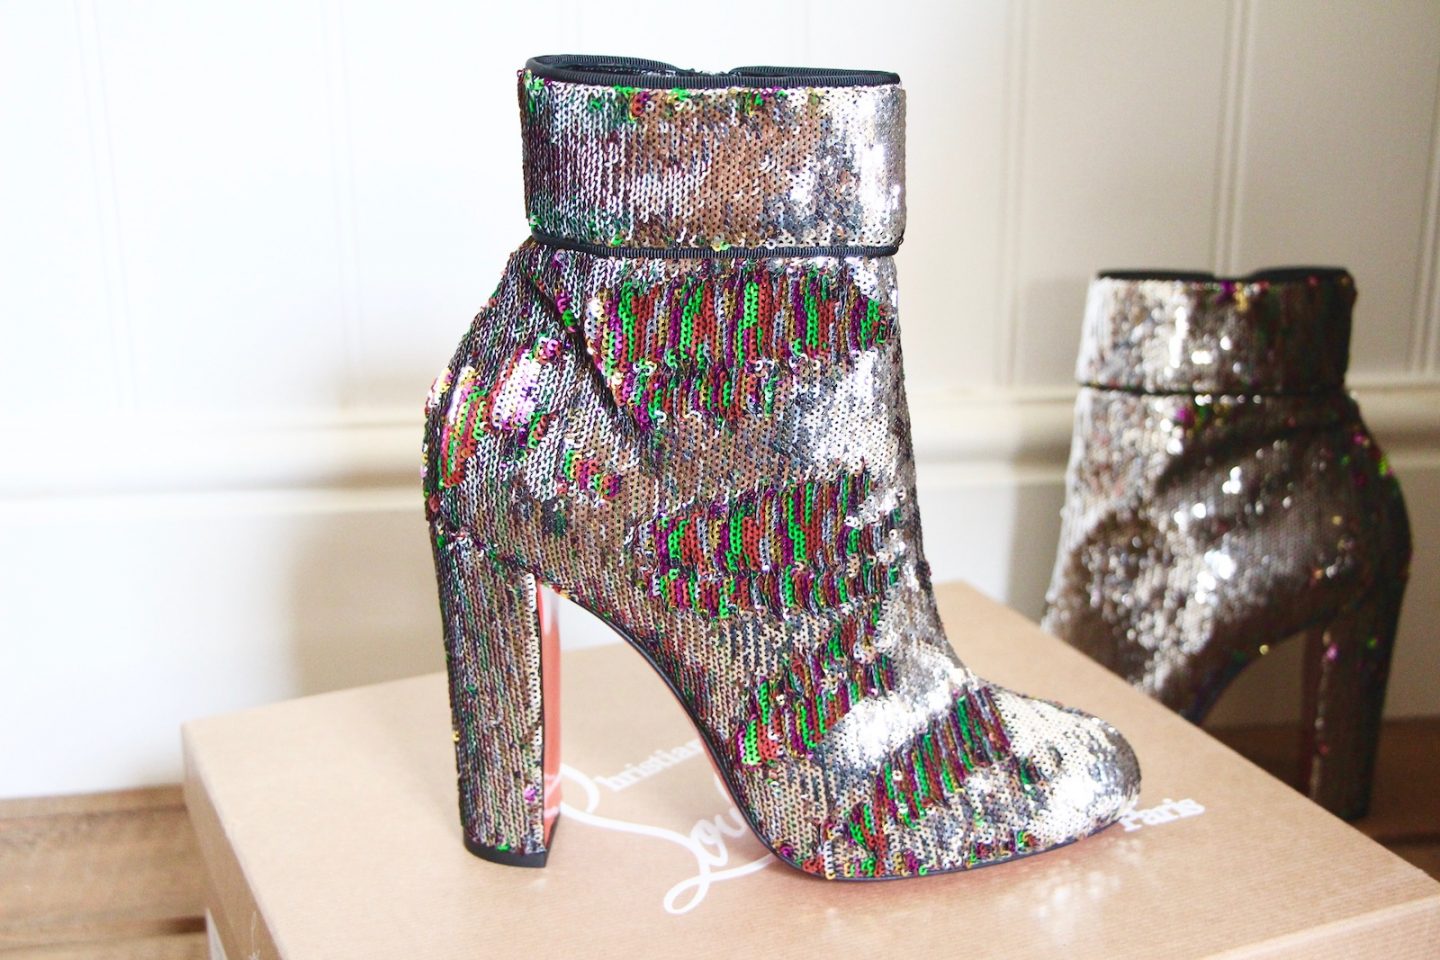 christian louboutin sequin boots